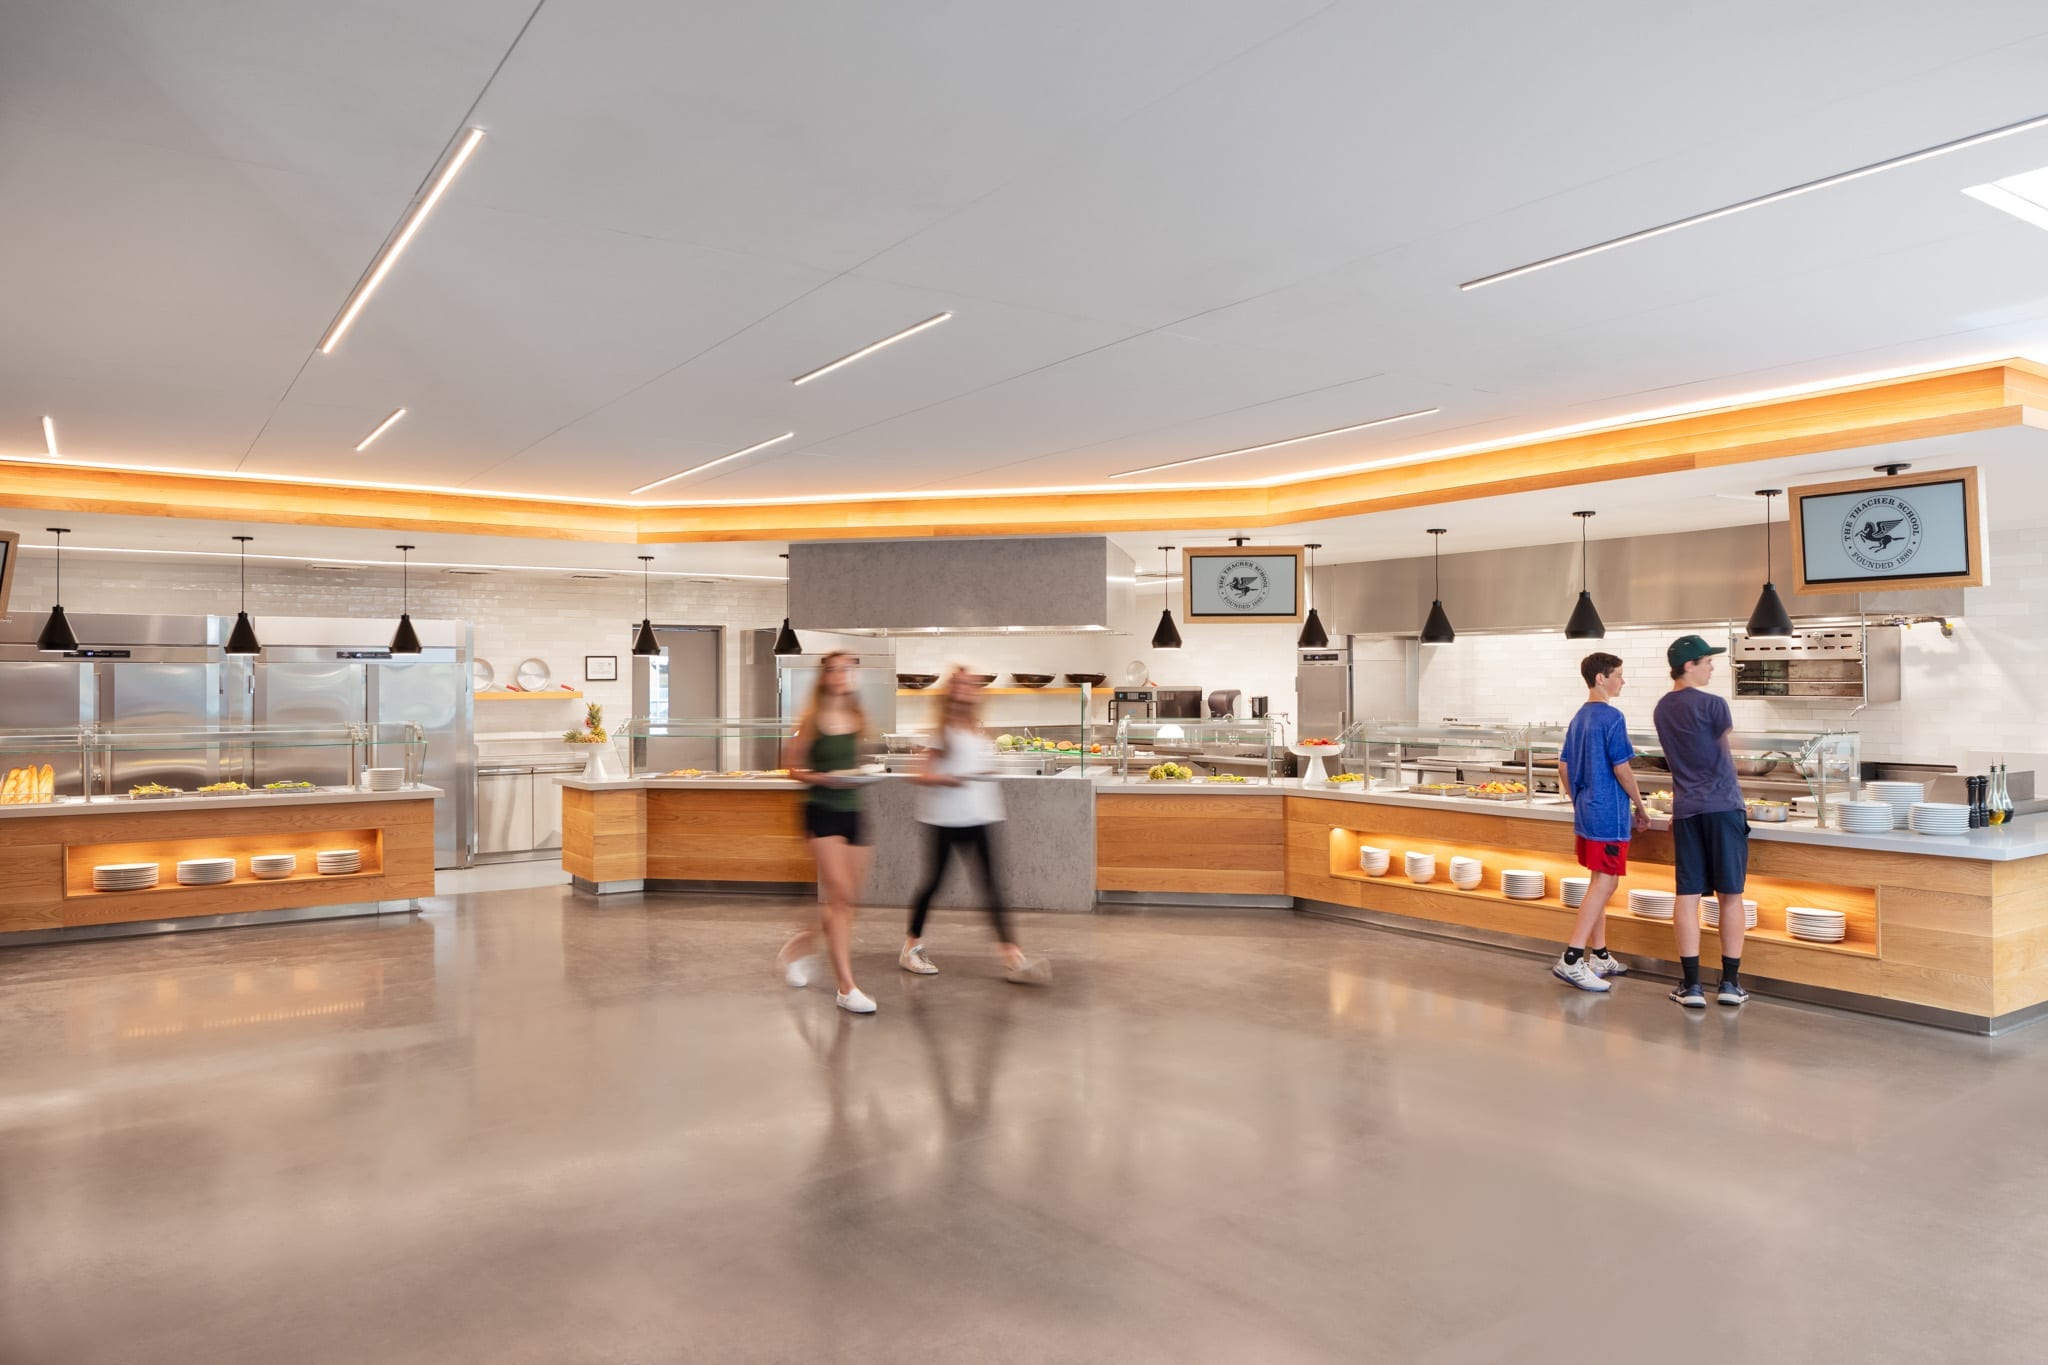 Thacher School dining facility.